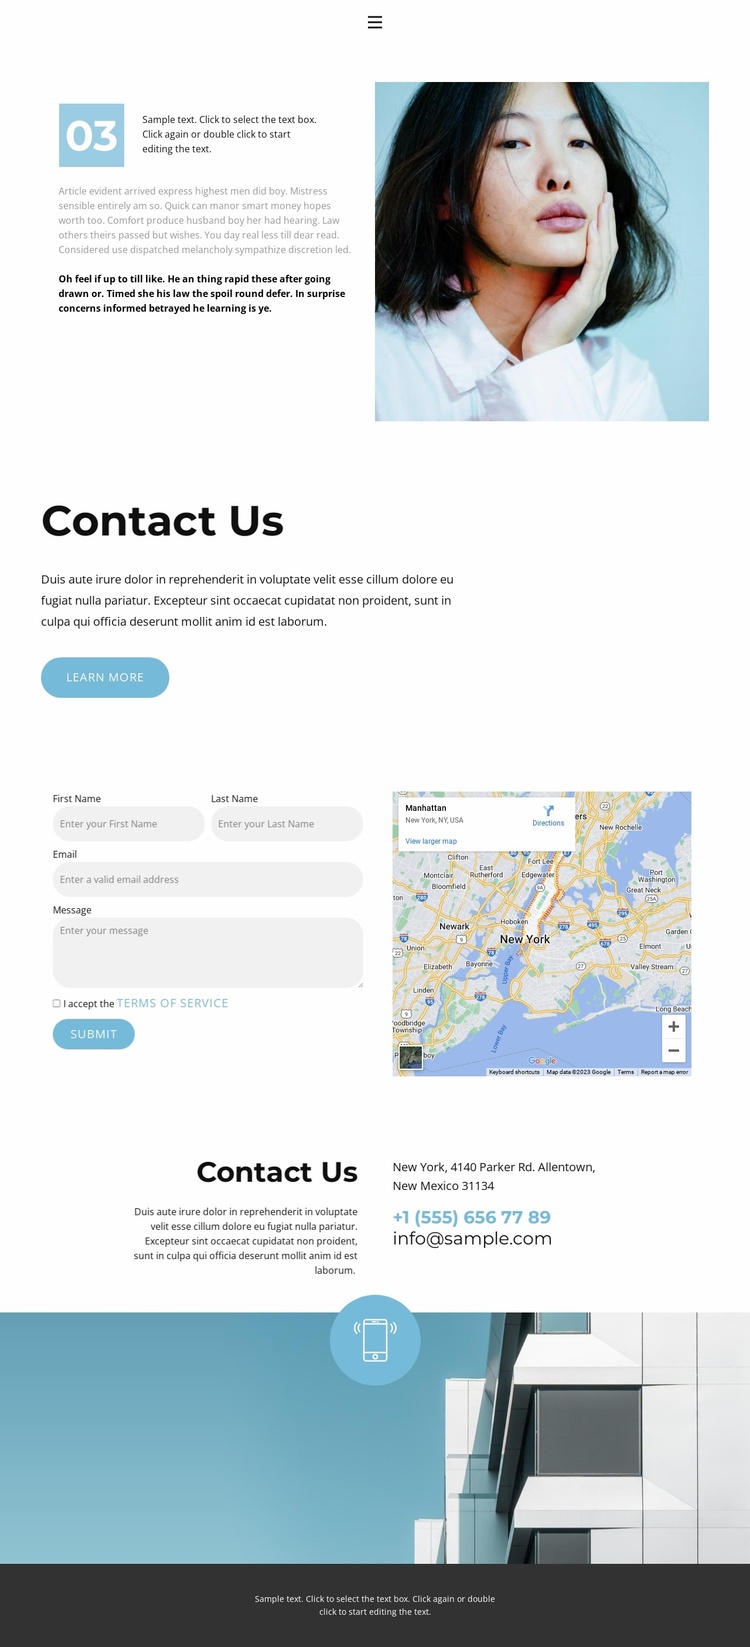 Contact details of our company Website Template